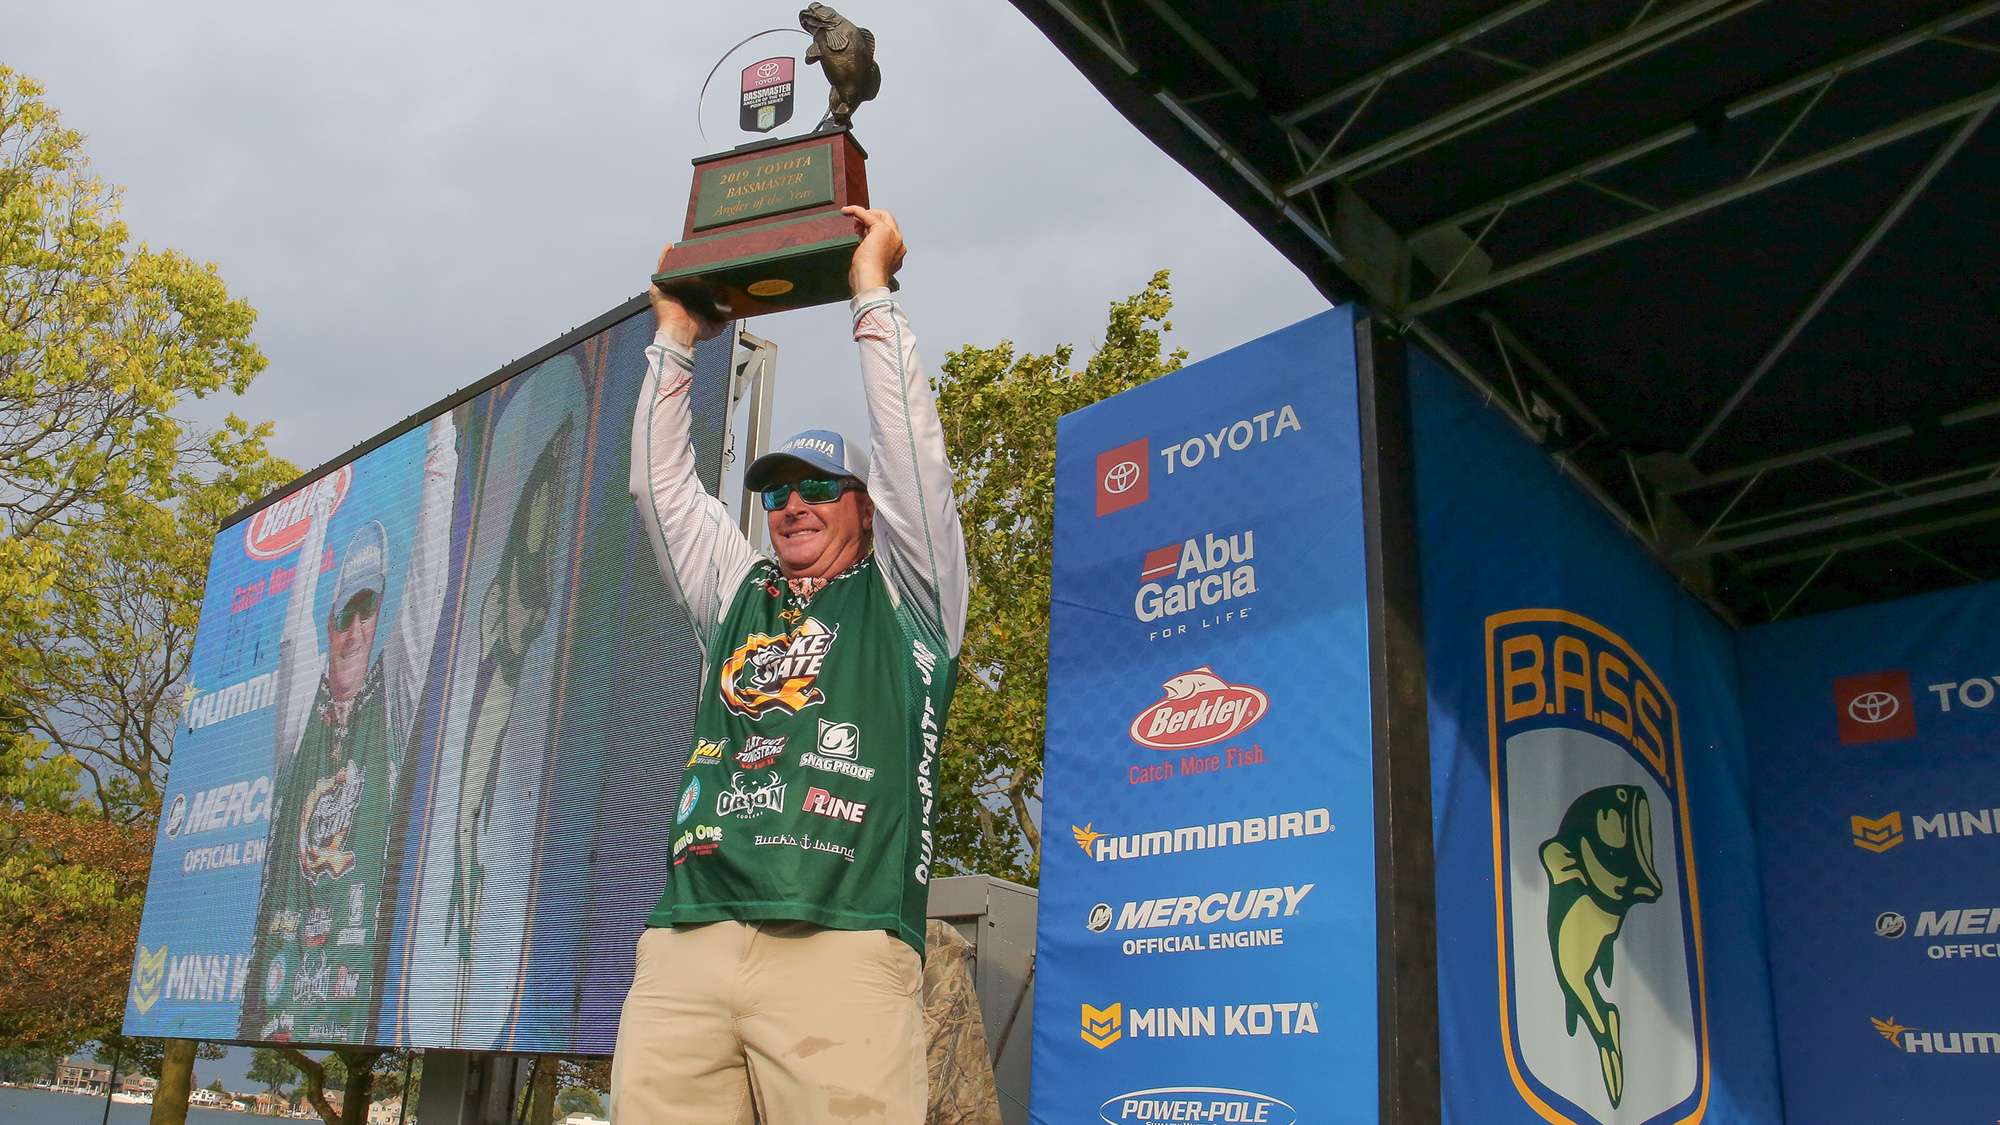 Scott Canterbury claims the 2019 Toyota Bassmaster Angler of the Year title!